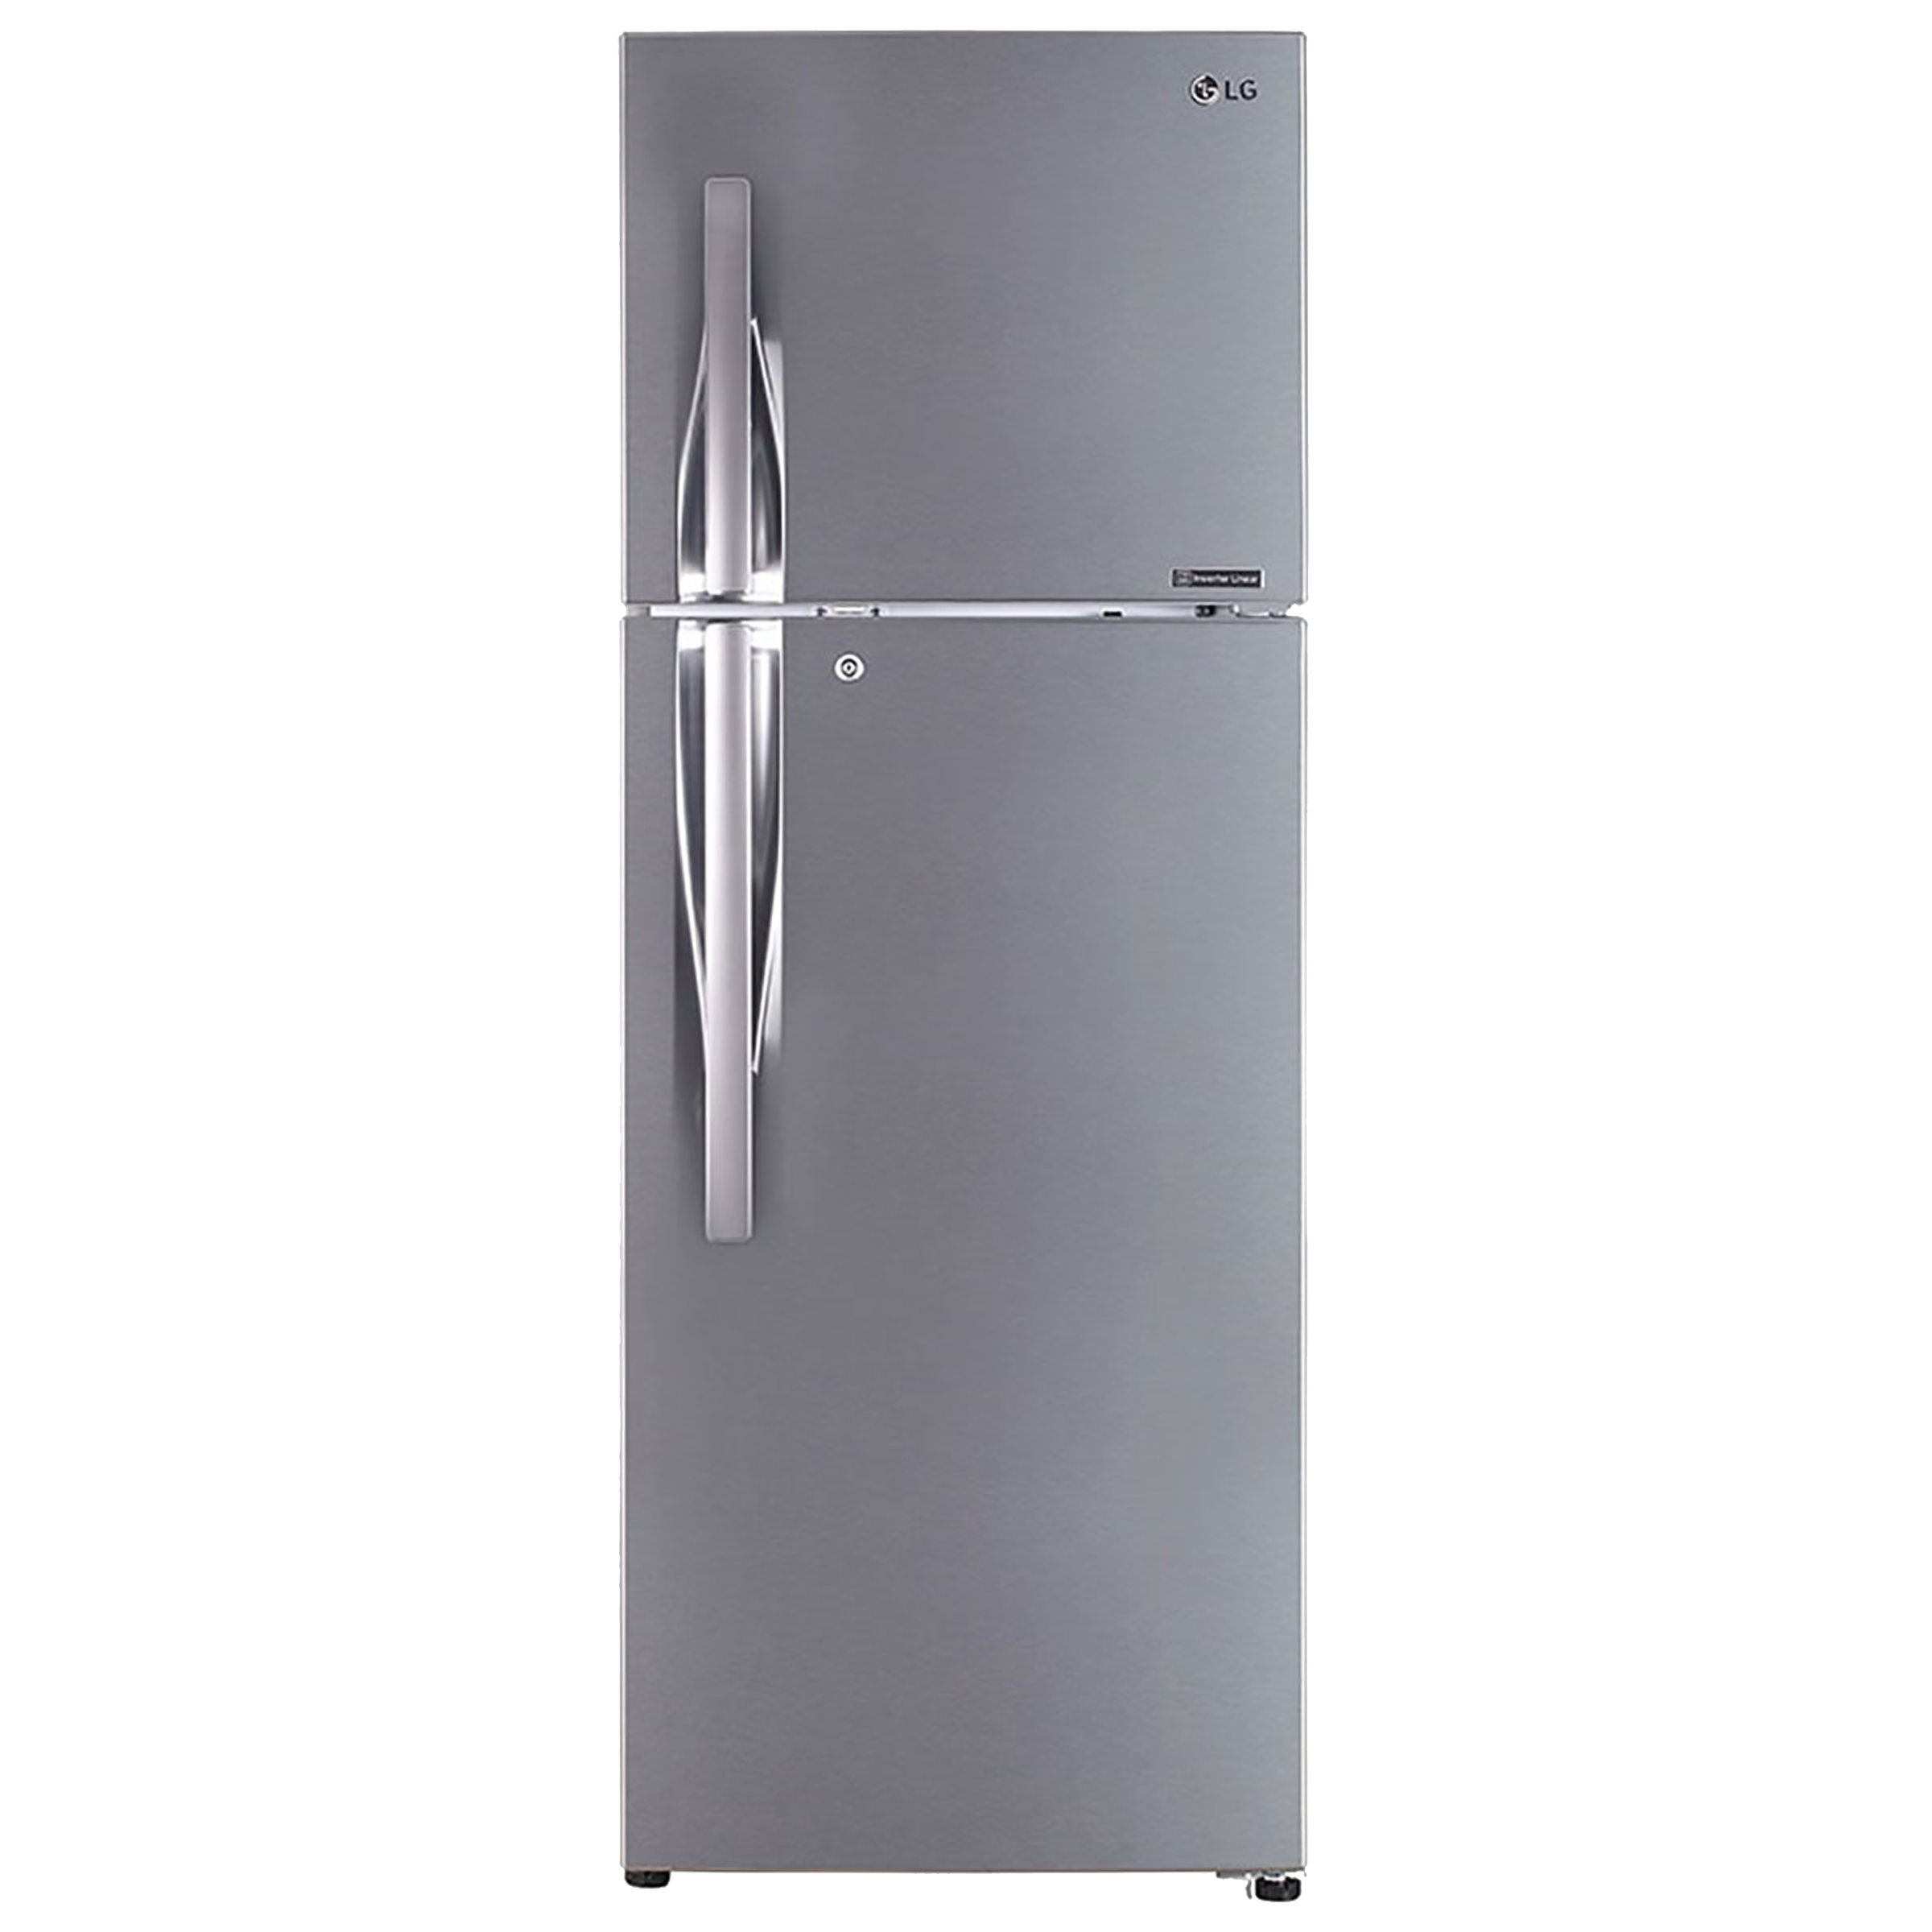 LG - lg 335 Litres 3 Star Frost Free Inverter Double Door Refrigerator (Convertible Plus, GL-T372JPZN.EPZZEBN, Shiny Steel)